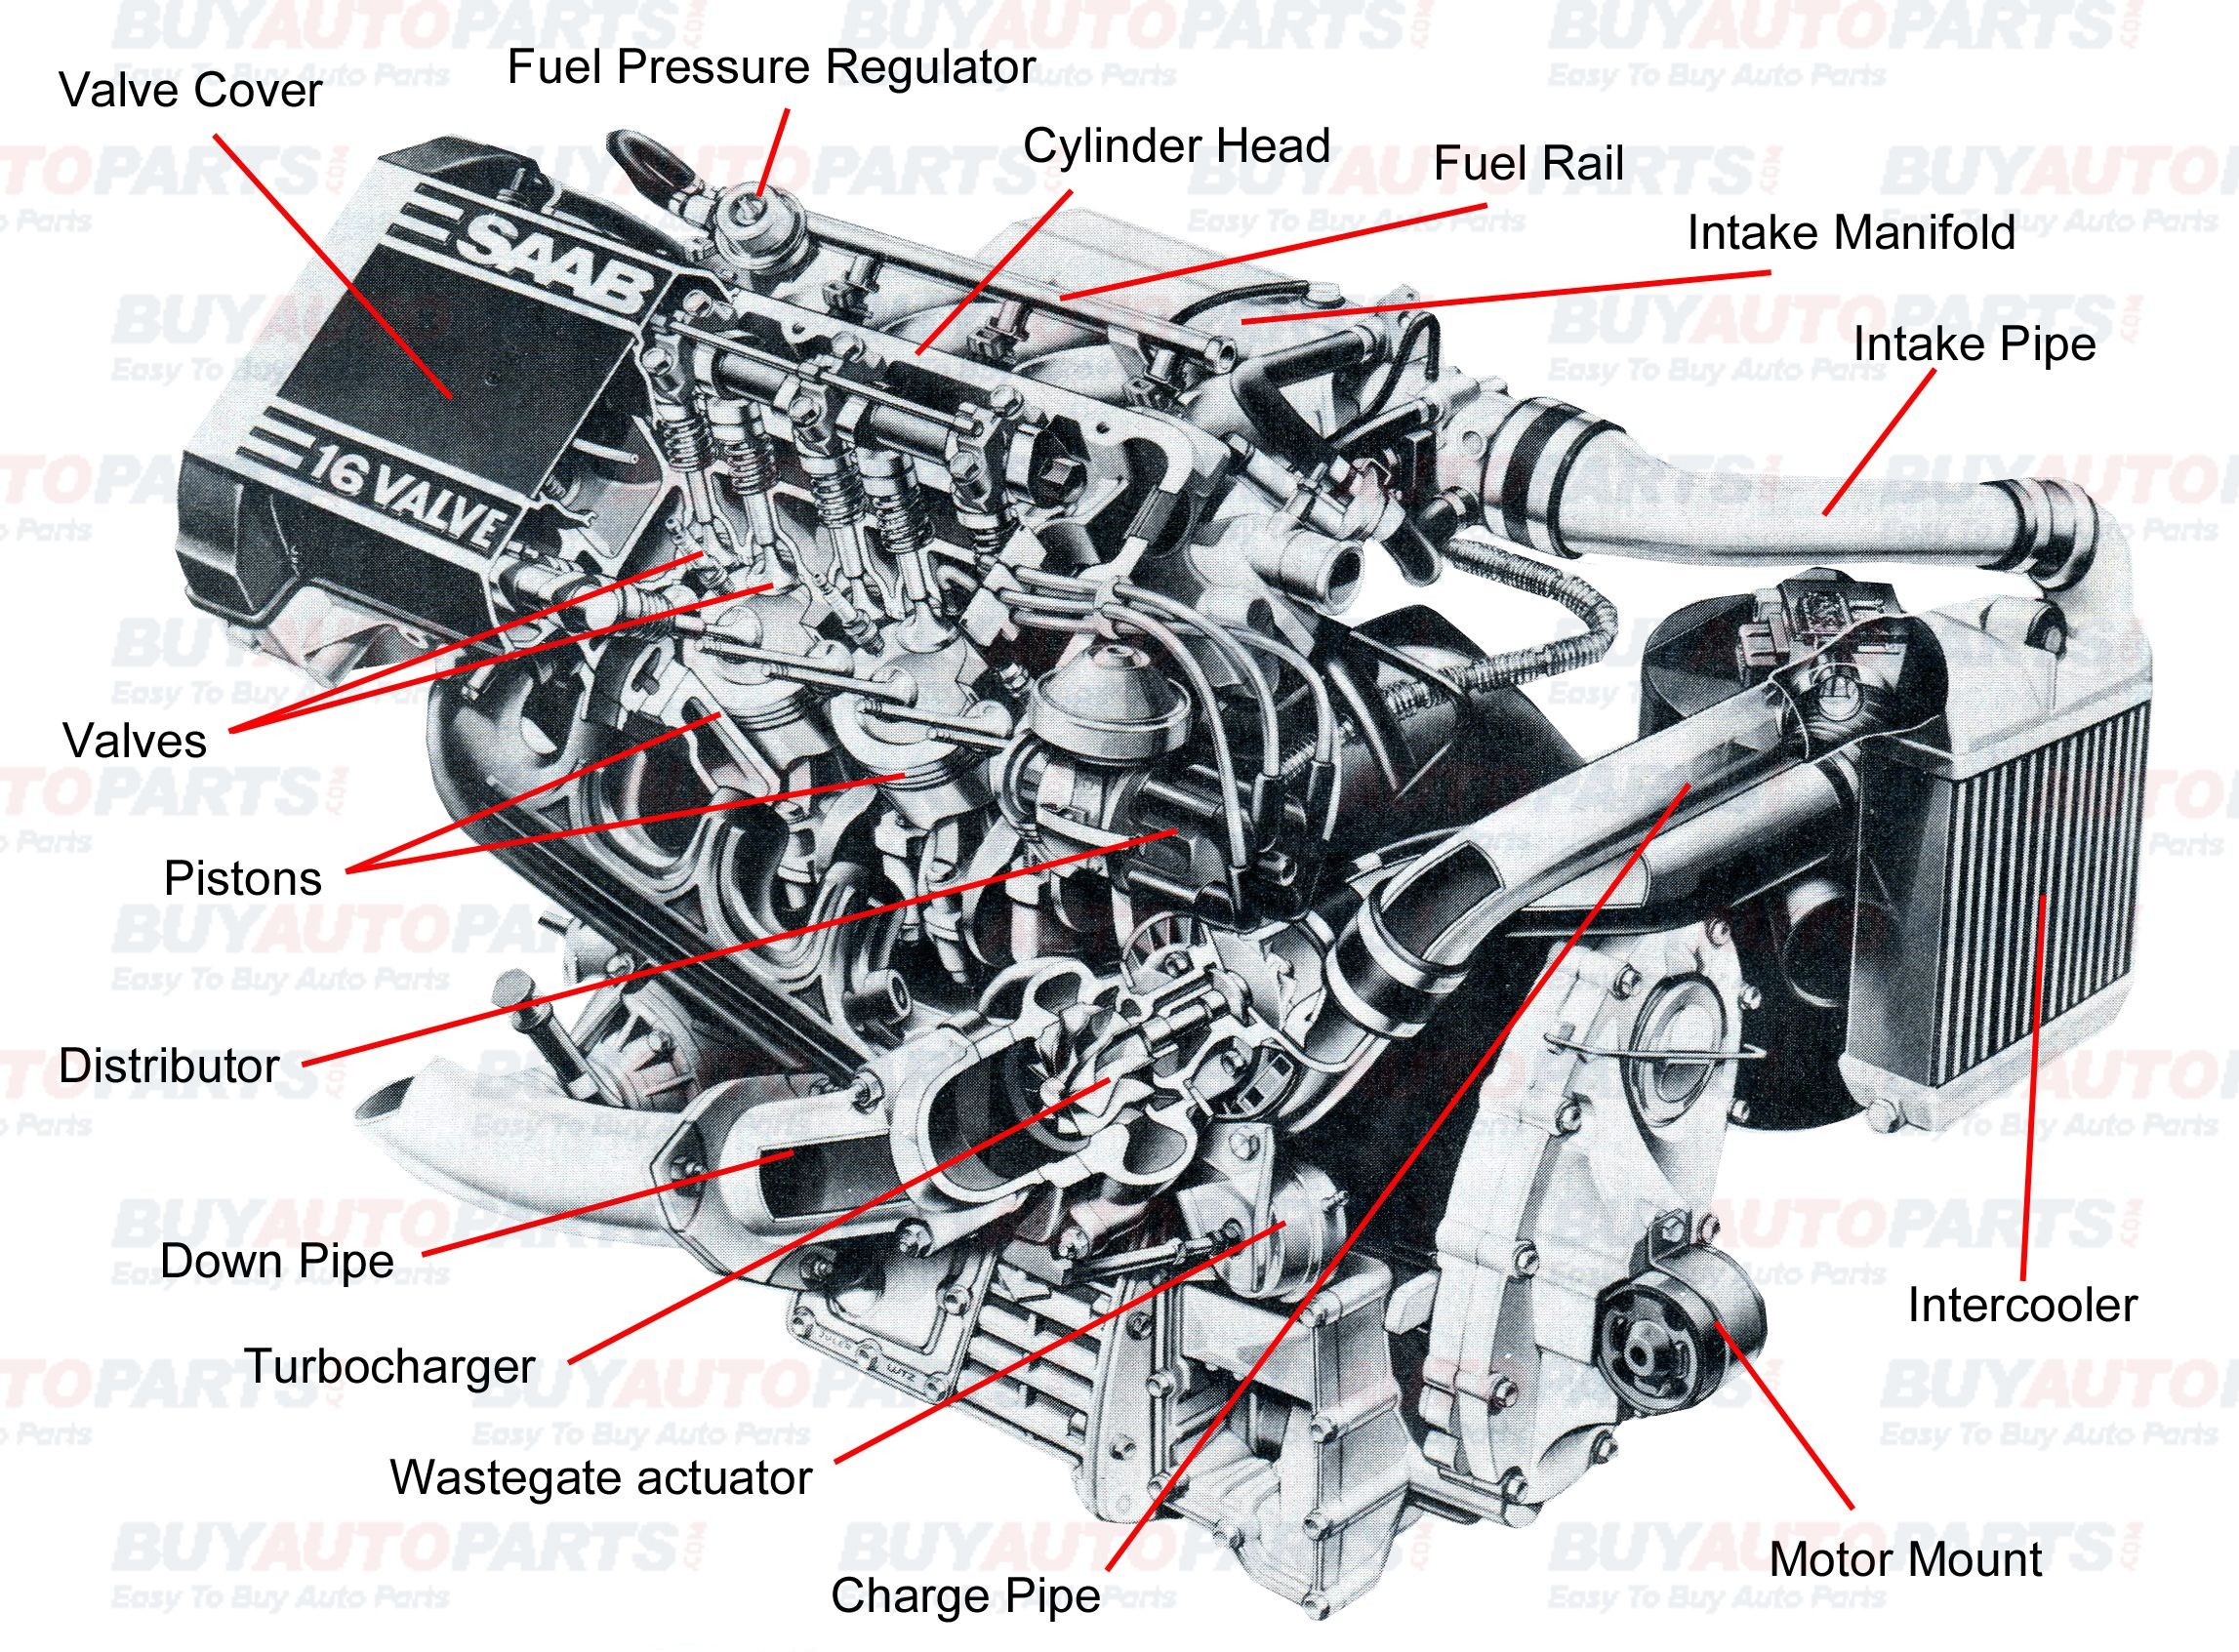 Mazda Rx8 Engine Diagram Pin by Jimmiejanet Testellamwfz On What Does An Engine with Turbo Of Mazda Rx8 Engine Diagram